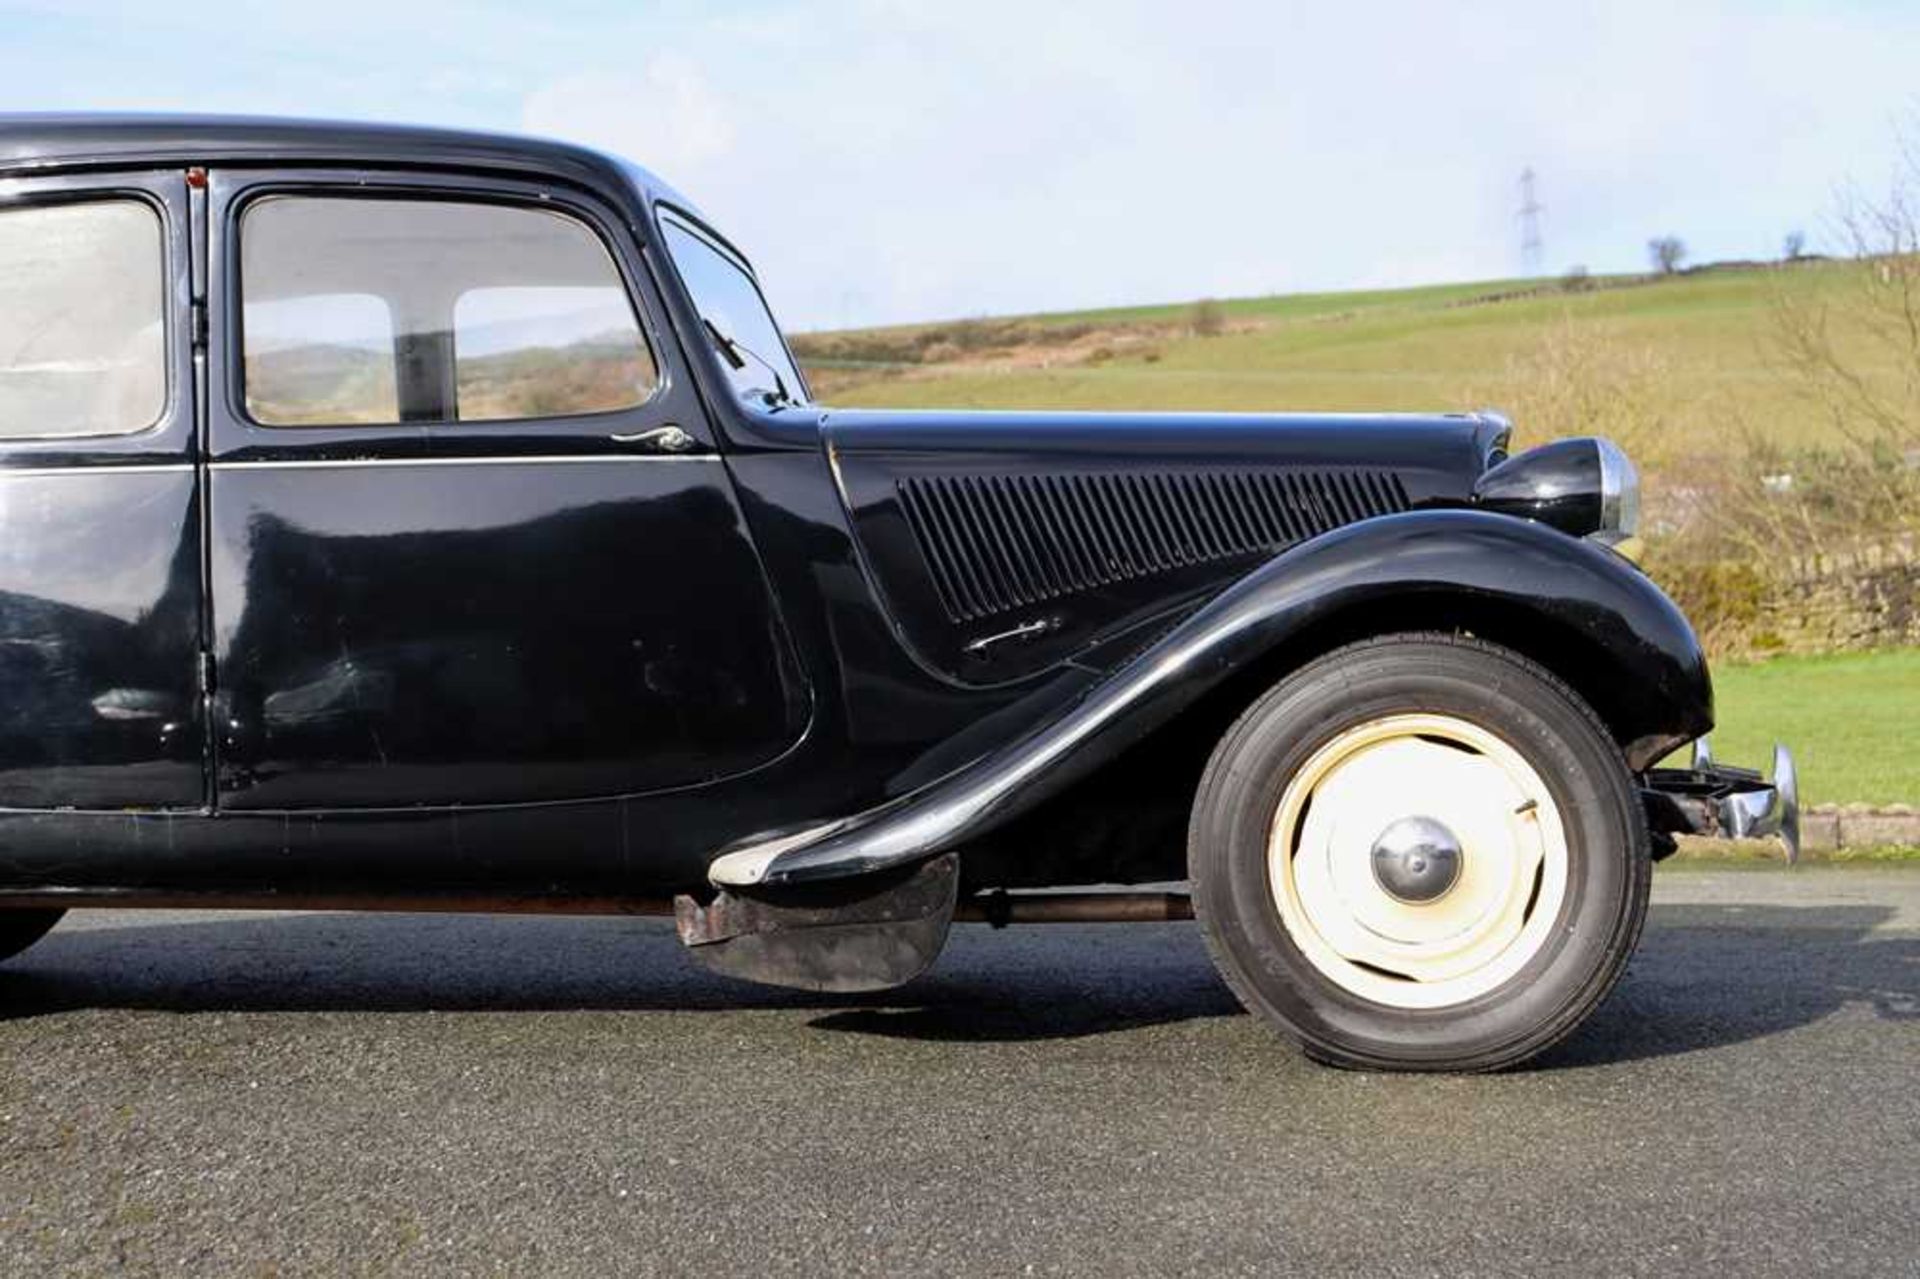 1952 Citroën 11BL Traction Avant In current ownership for over 40 years - Image 26 of 60